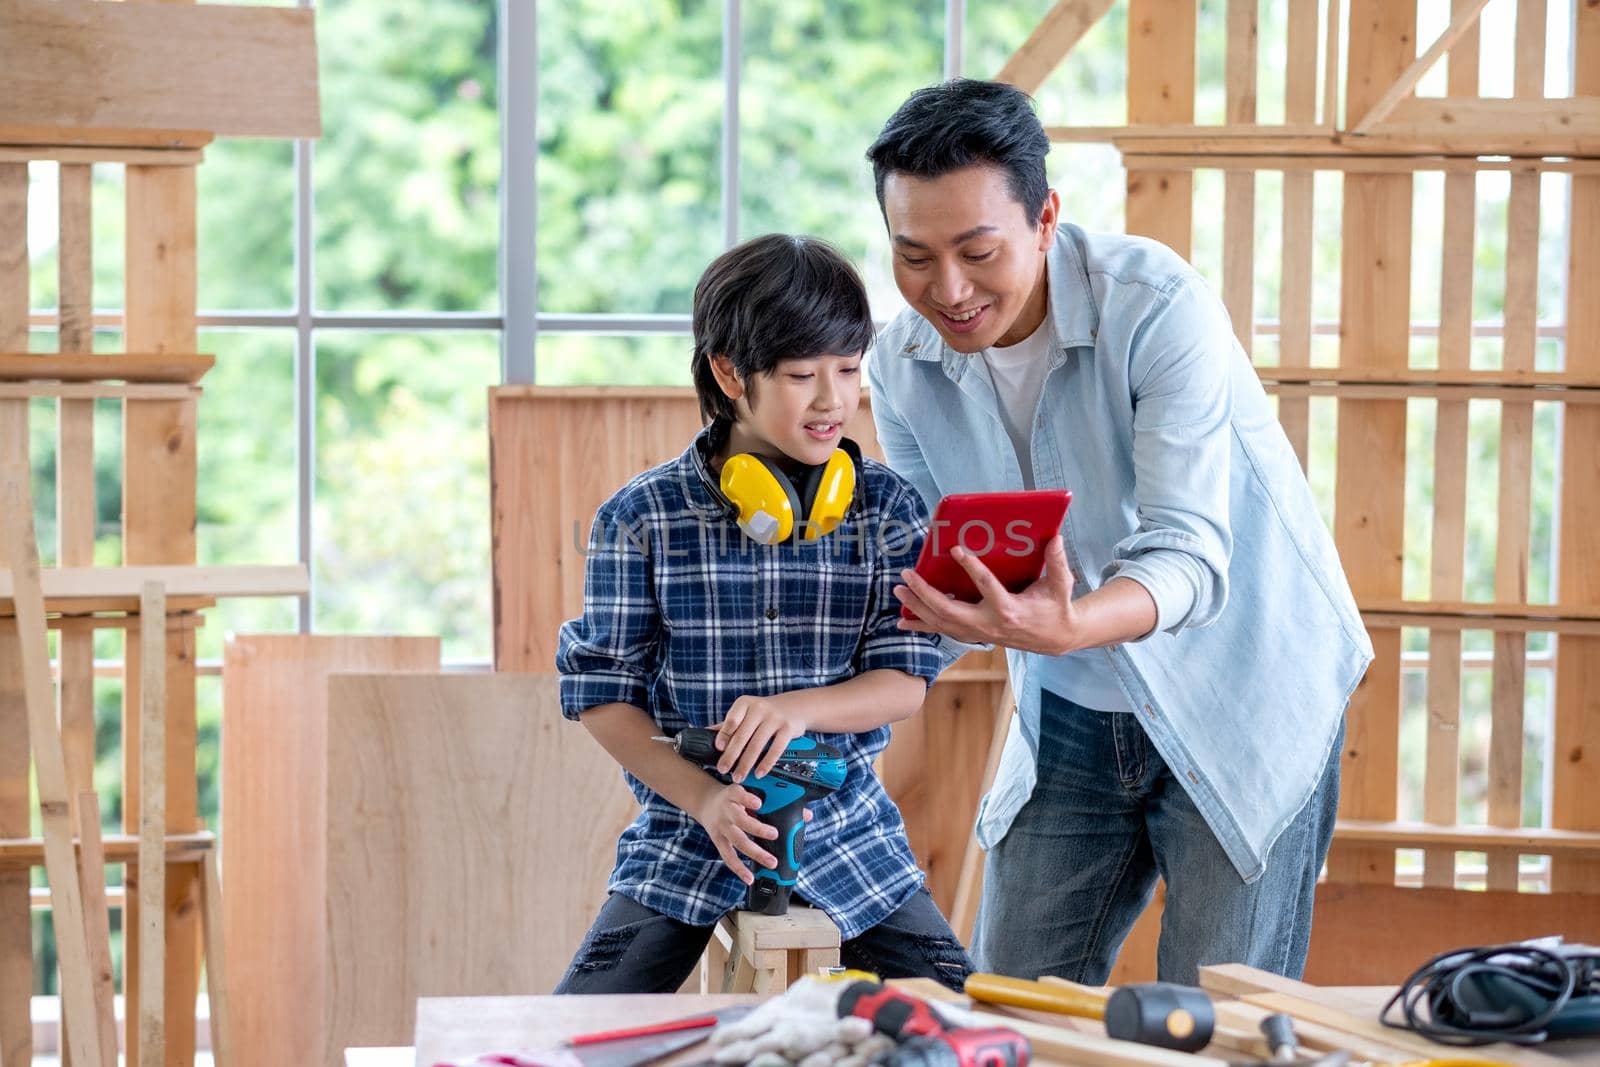 Asian man hold and show tablet to boy and they look happy during carpentering work in their house.